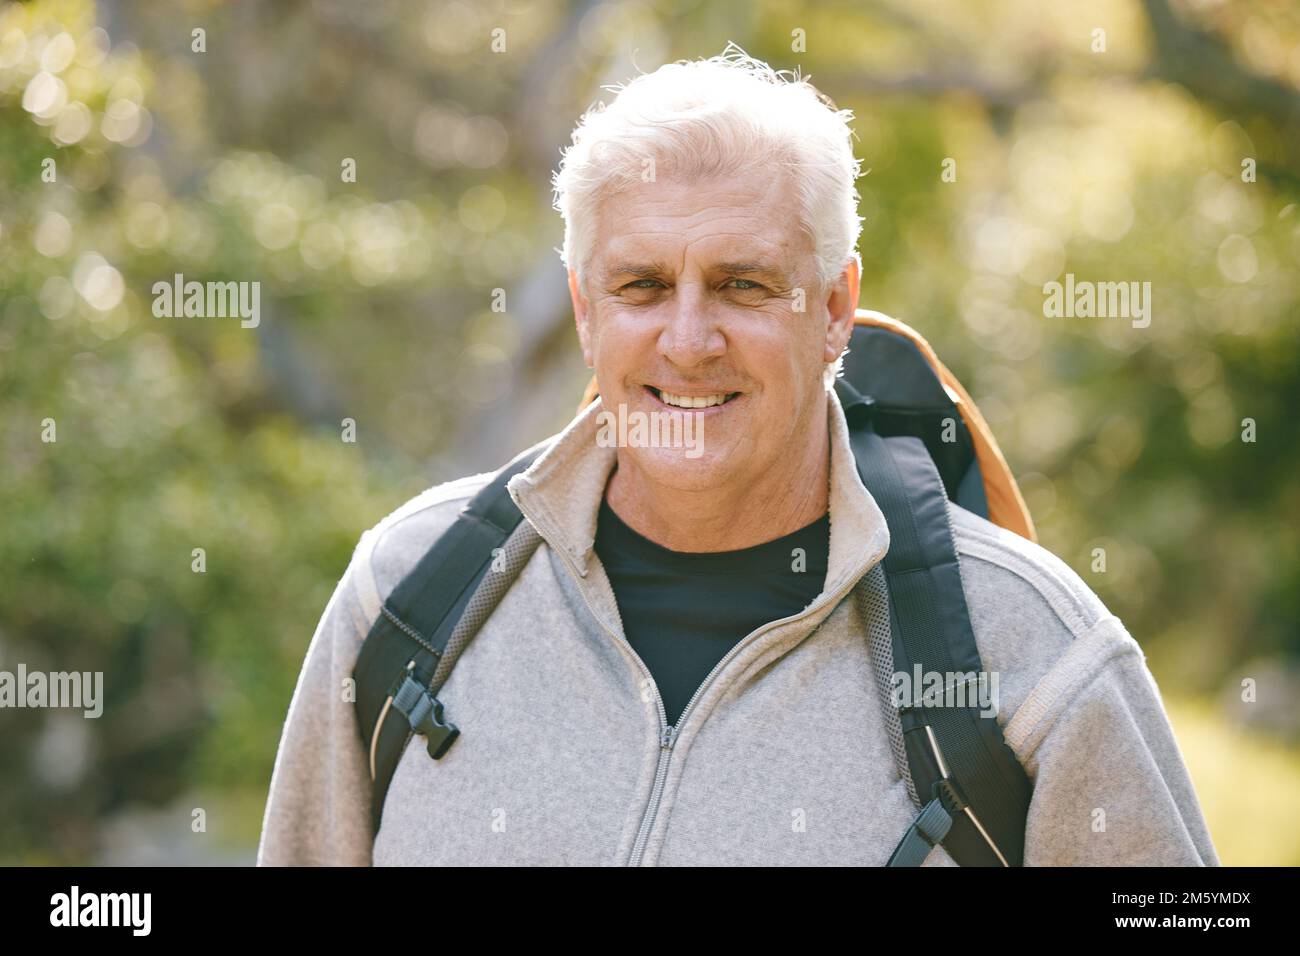 Hiking, fitness and elderly man in nature for exercise and trekking in the park, vitality and active lifestyle portrait. Senior hiker, travel and Stock Photo